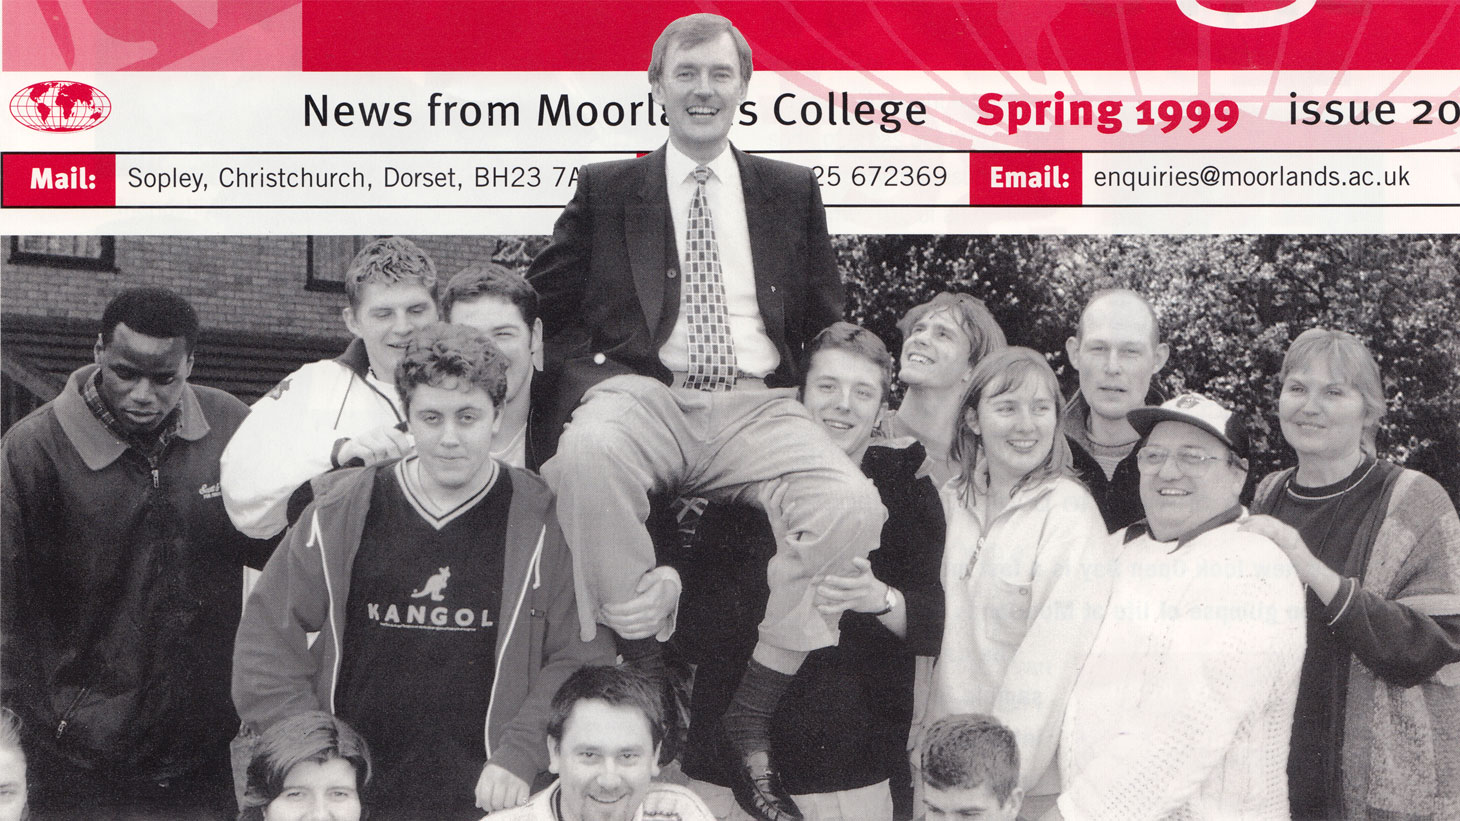 Cover of college newsletter, featuring Steve Brady, Spring 1999